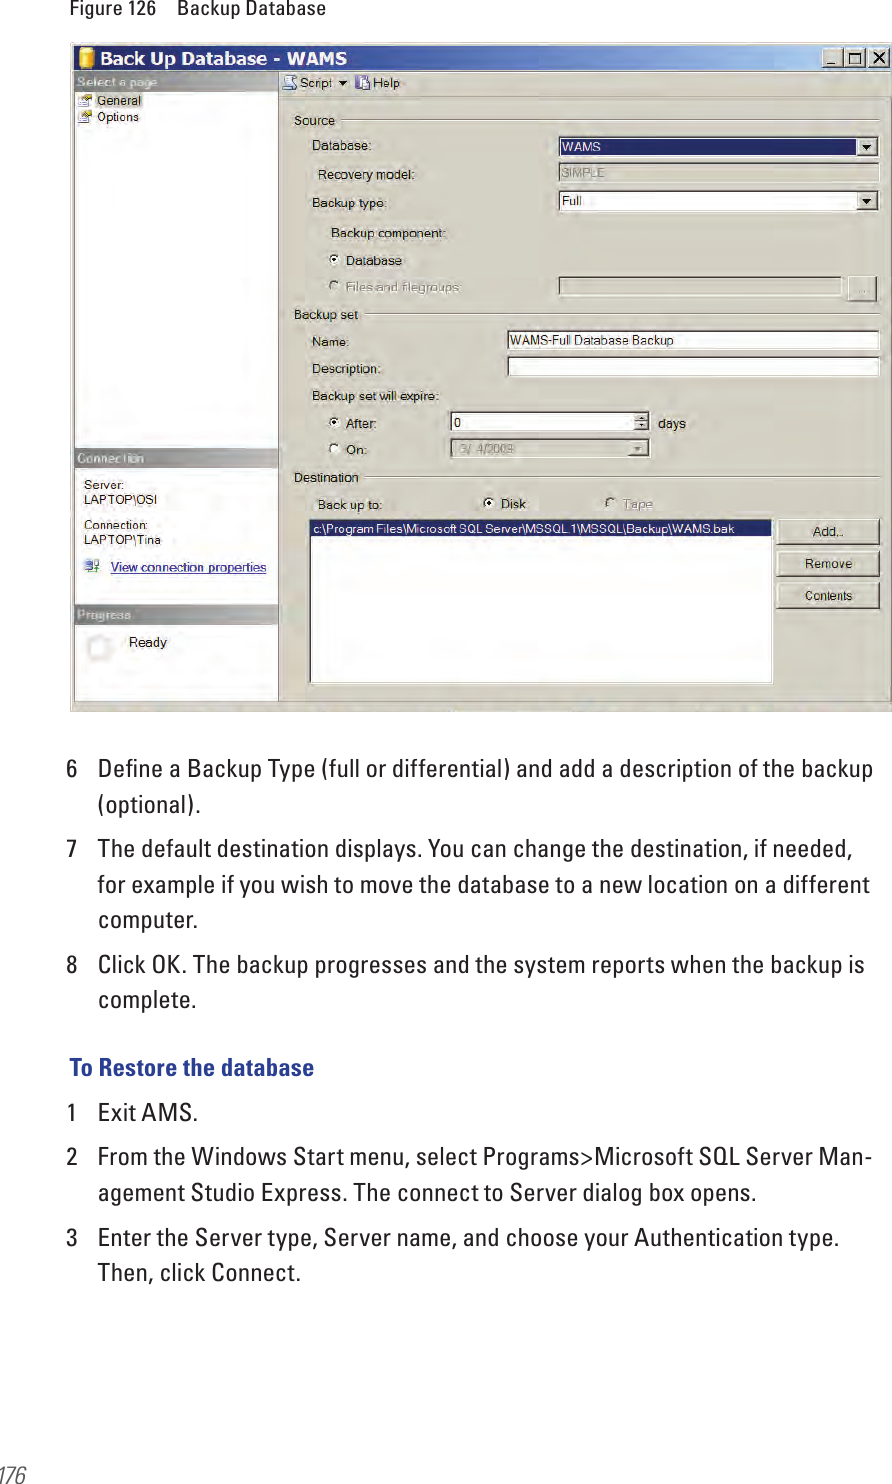 176Figure 126  Backup Database6  Deﬁne a Backup Type (full or differential) and add a description of the backup (optional). 7  The default destination displays. You can change the destination, if needed, for example if you wish to move the database to a new location on a different computer.8  Click OK. The backup progresses and the system reports when the backup is complete.To Restore the database1  Exit AMS.2  From the Windows Start menu, select Programs&gt;Microsoft SQL Server Man-agement Studio Express. The connect to Server dialog box opens.3  Enter the Server type, Server name, and choose your Authentication type. Then, click Connect.